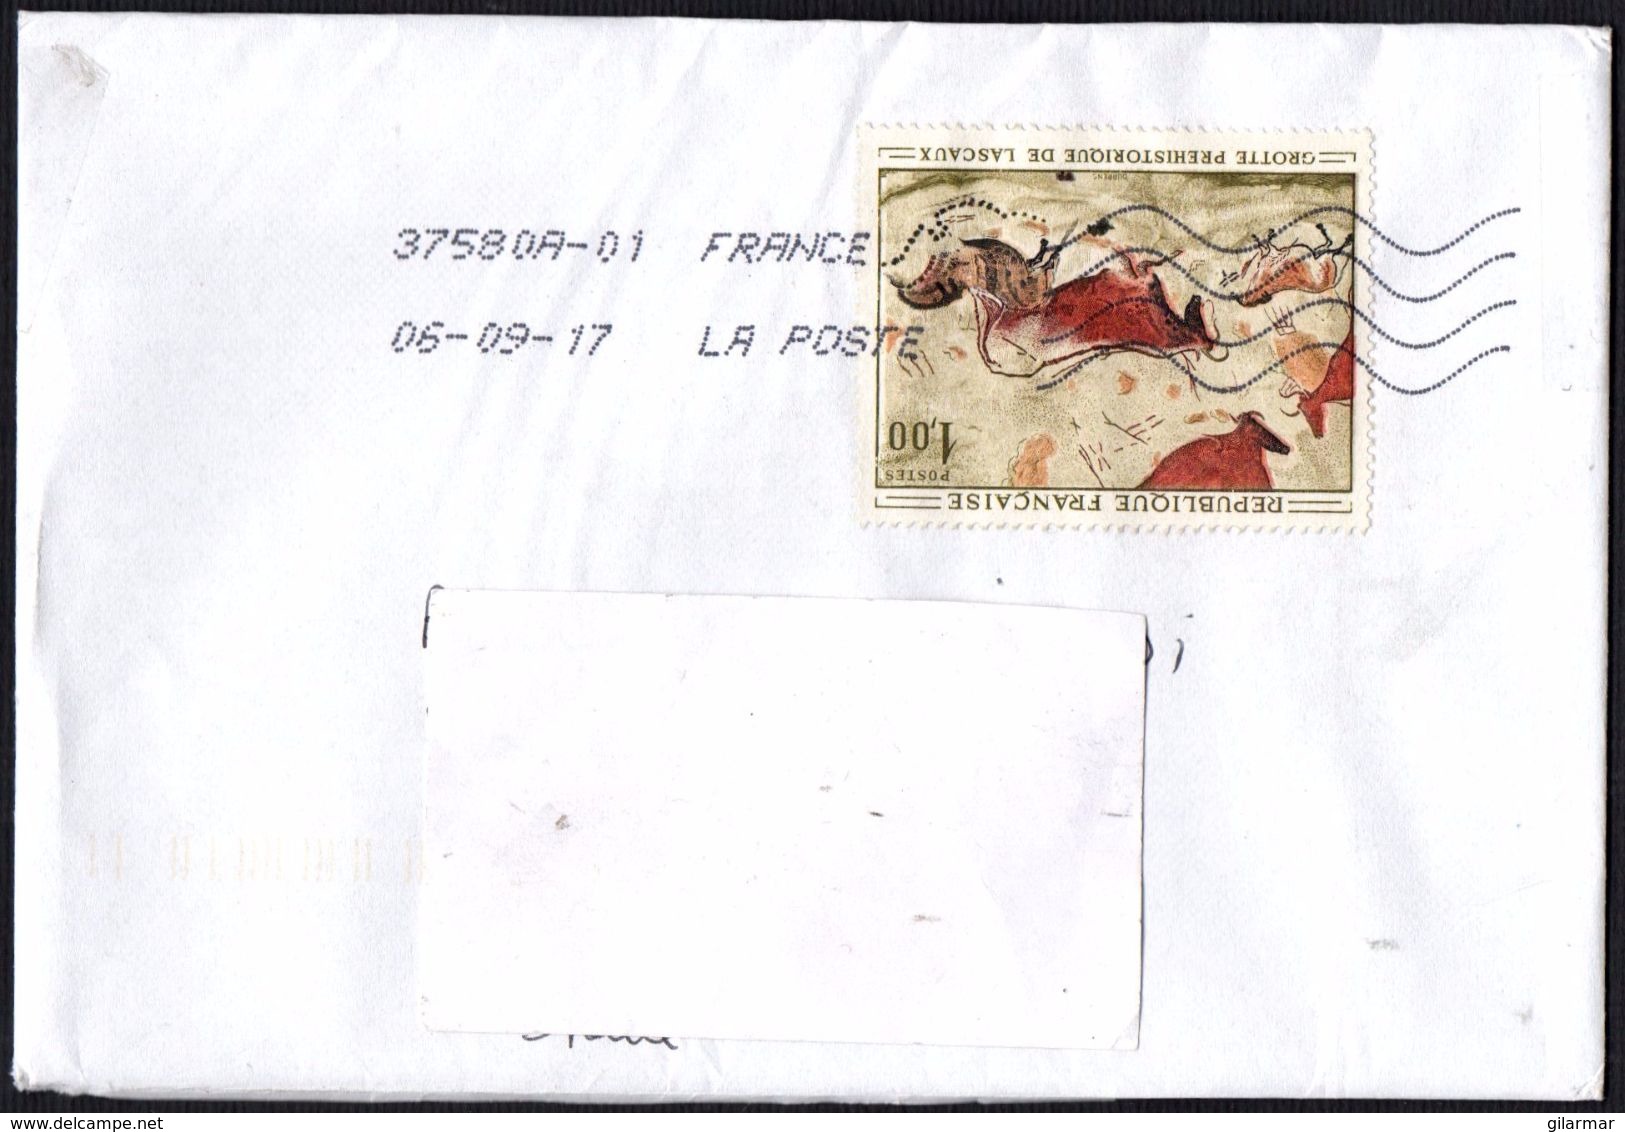 FRANCE 2017 - MAILED ENVELOPE - PREHISTORIC CAVE OF LASCAUX - Archaeology